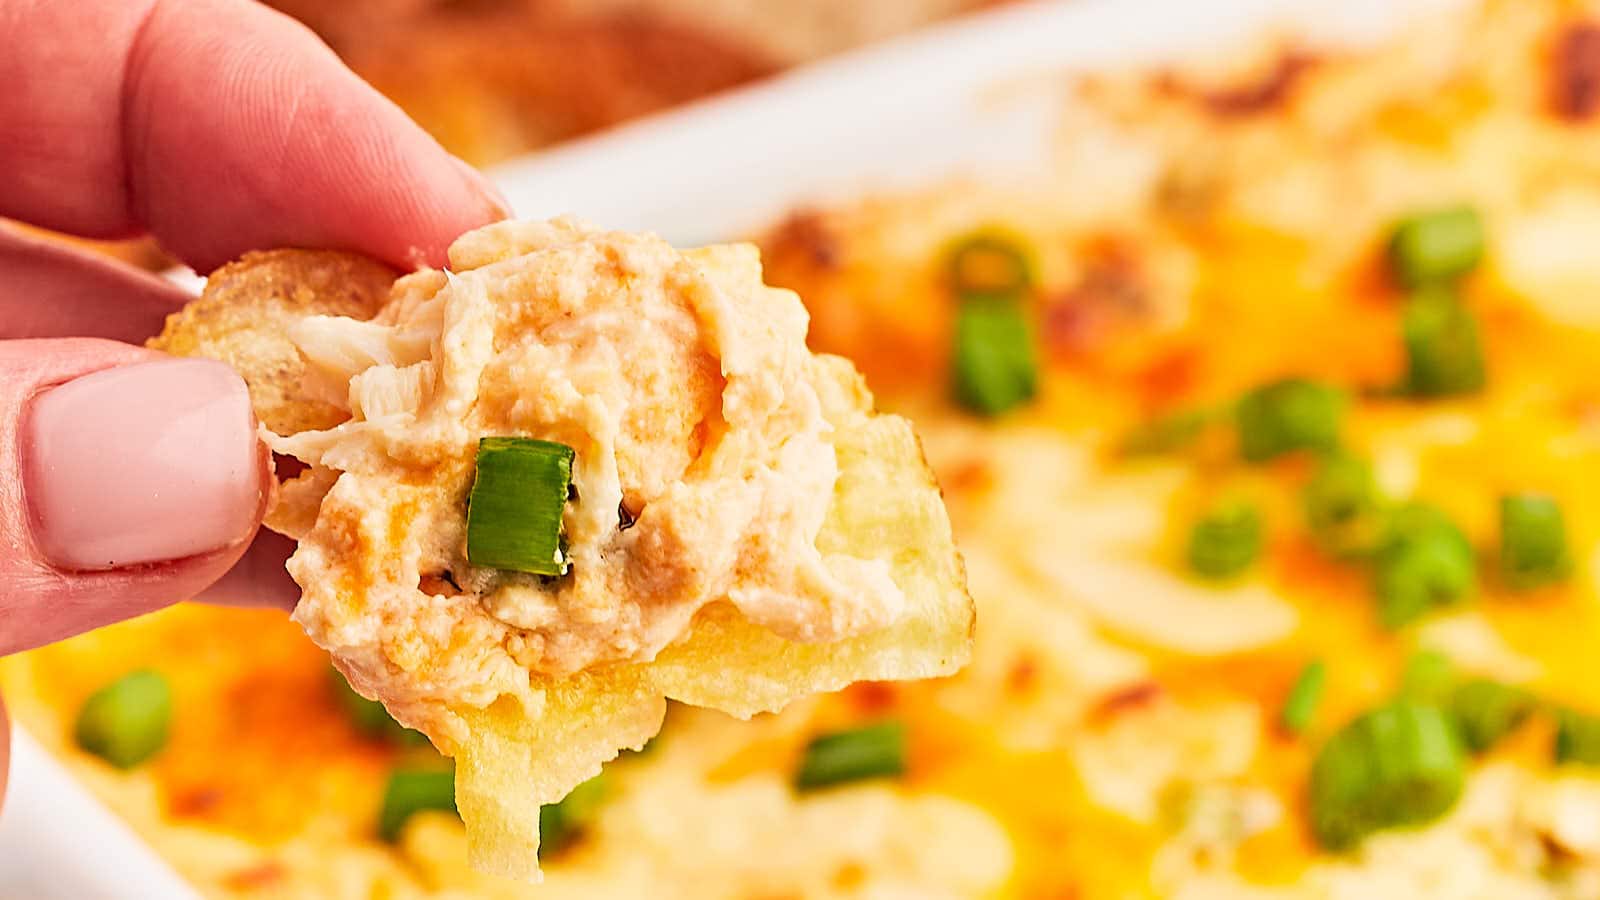 Crab Dip recipe by Cheerful Cook.